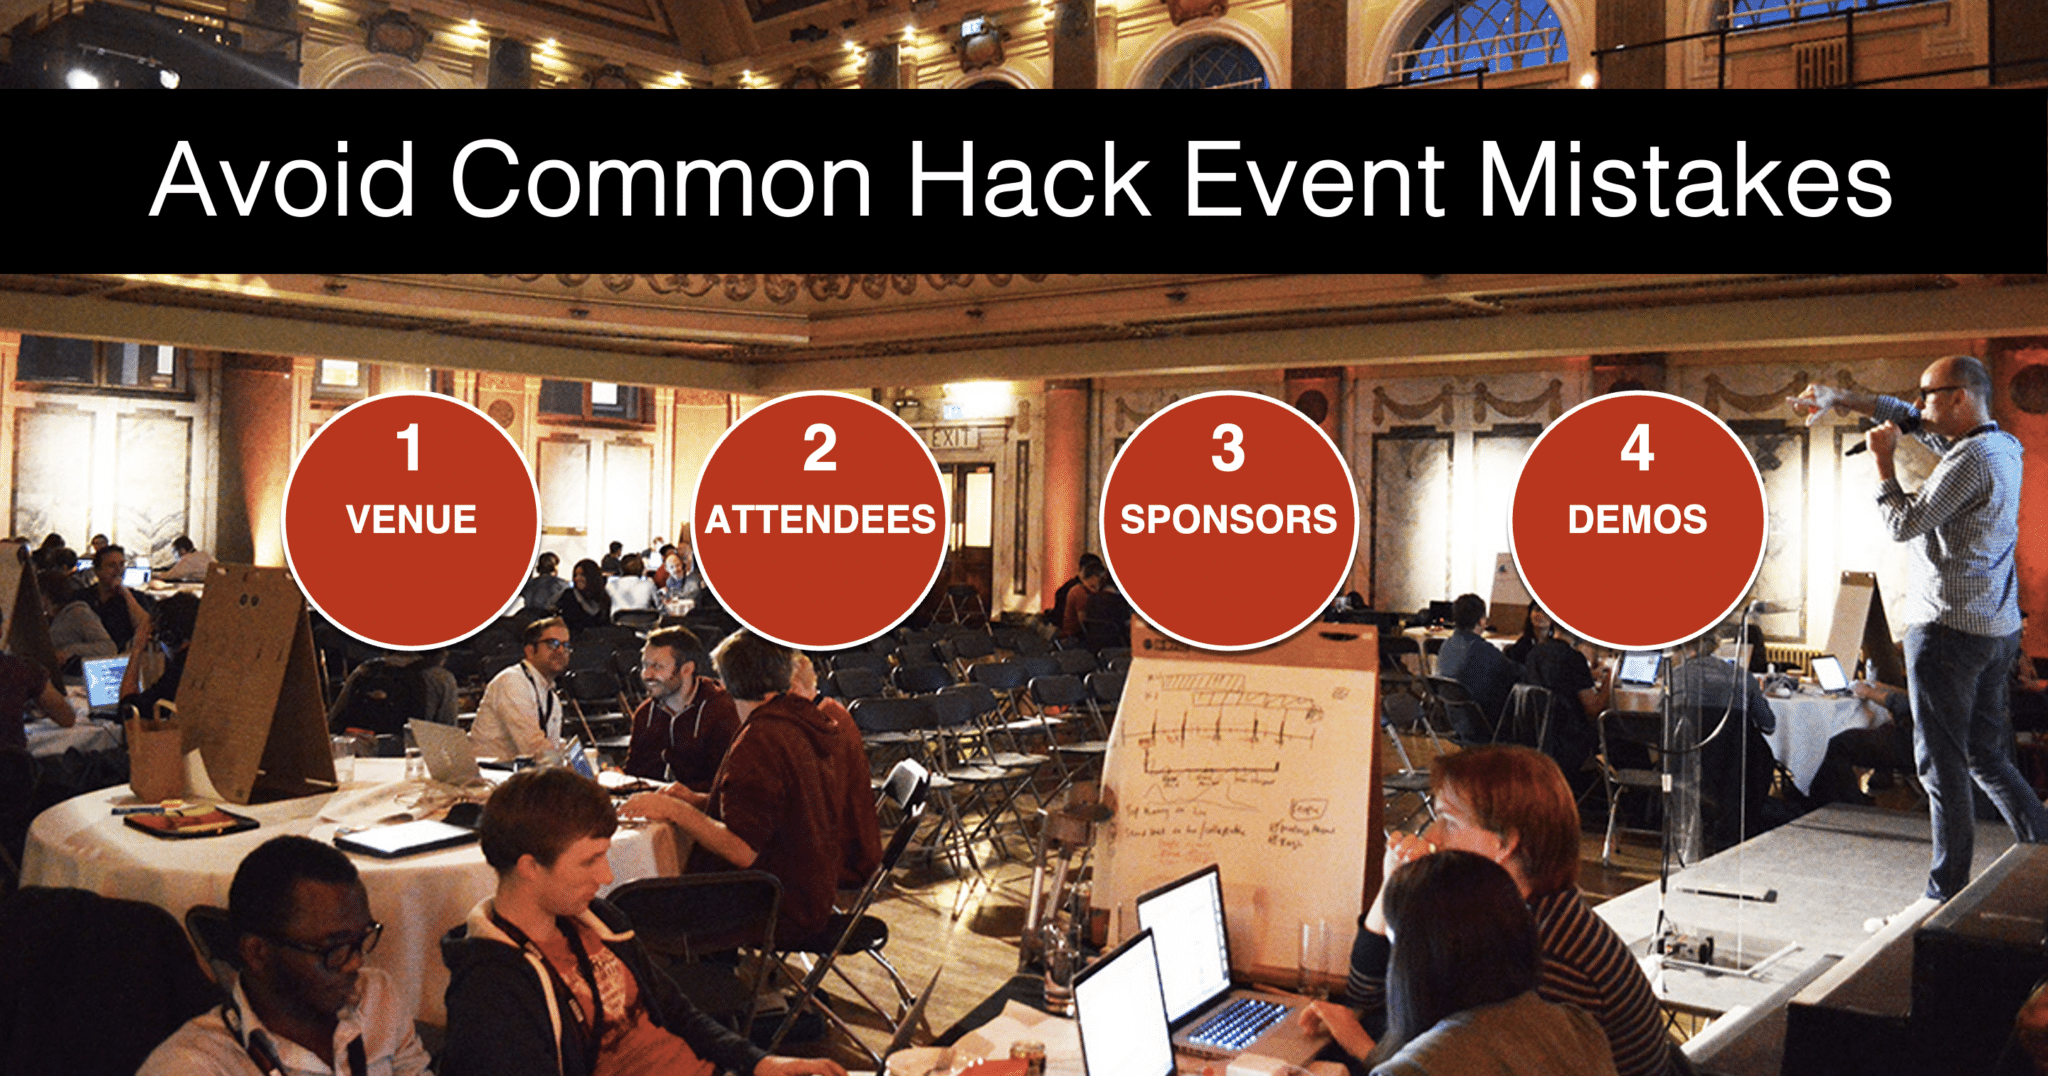 How to avoid common Hack Event mistakes